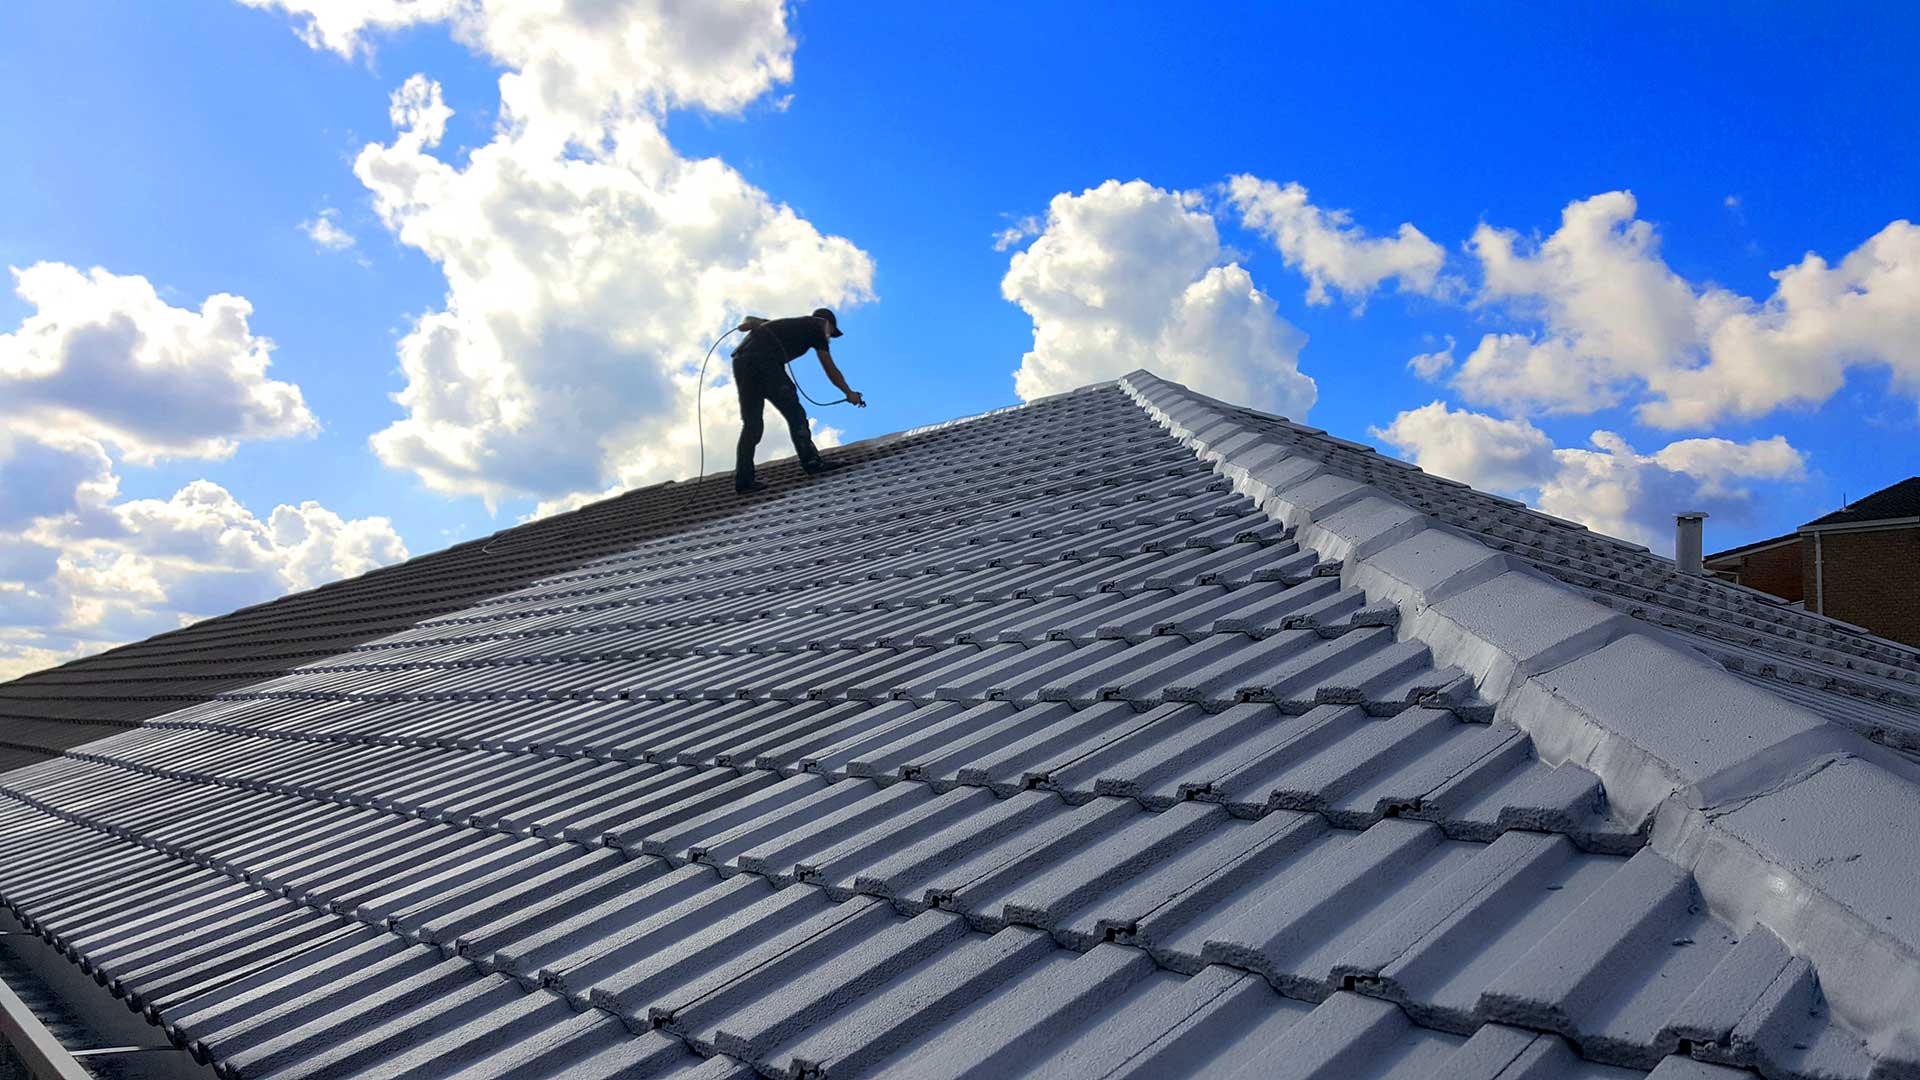 ROOF REPLACEMENT RK Roofing Contractors Chicago Local Roofing Company